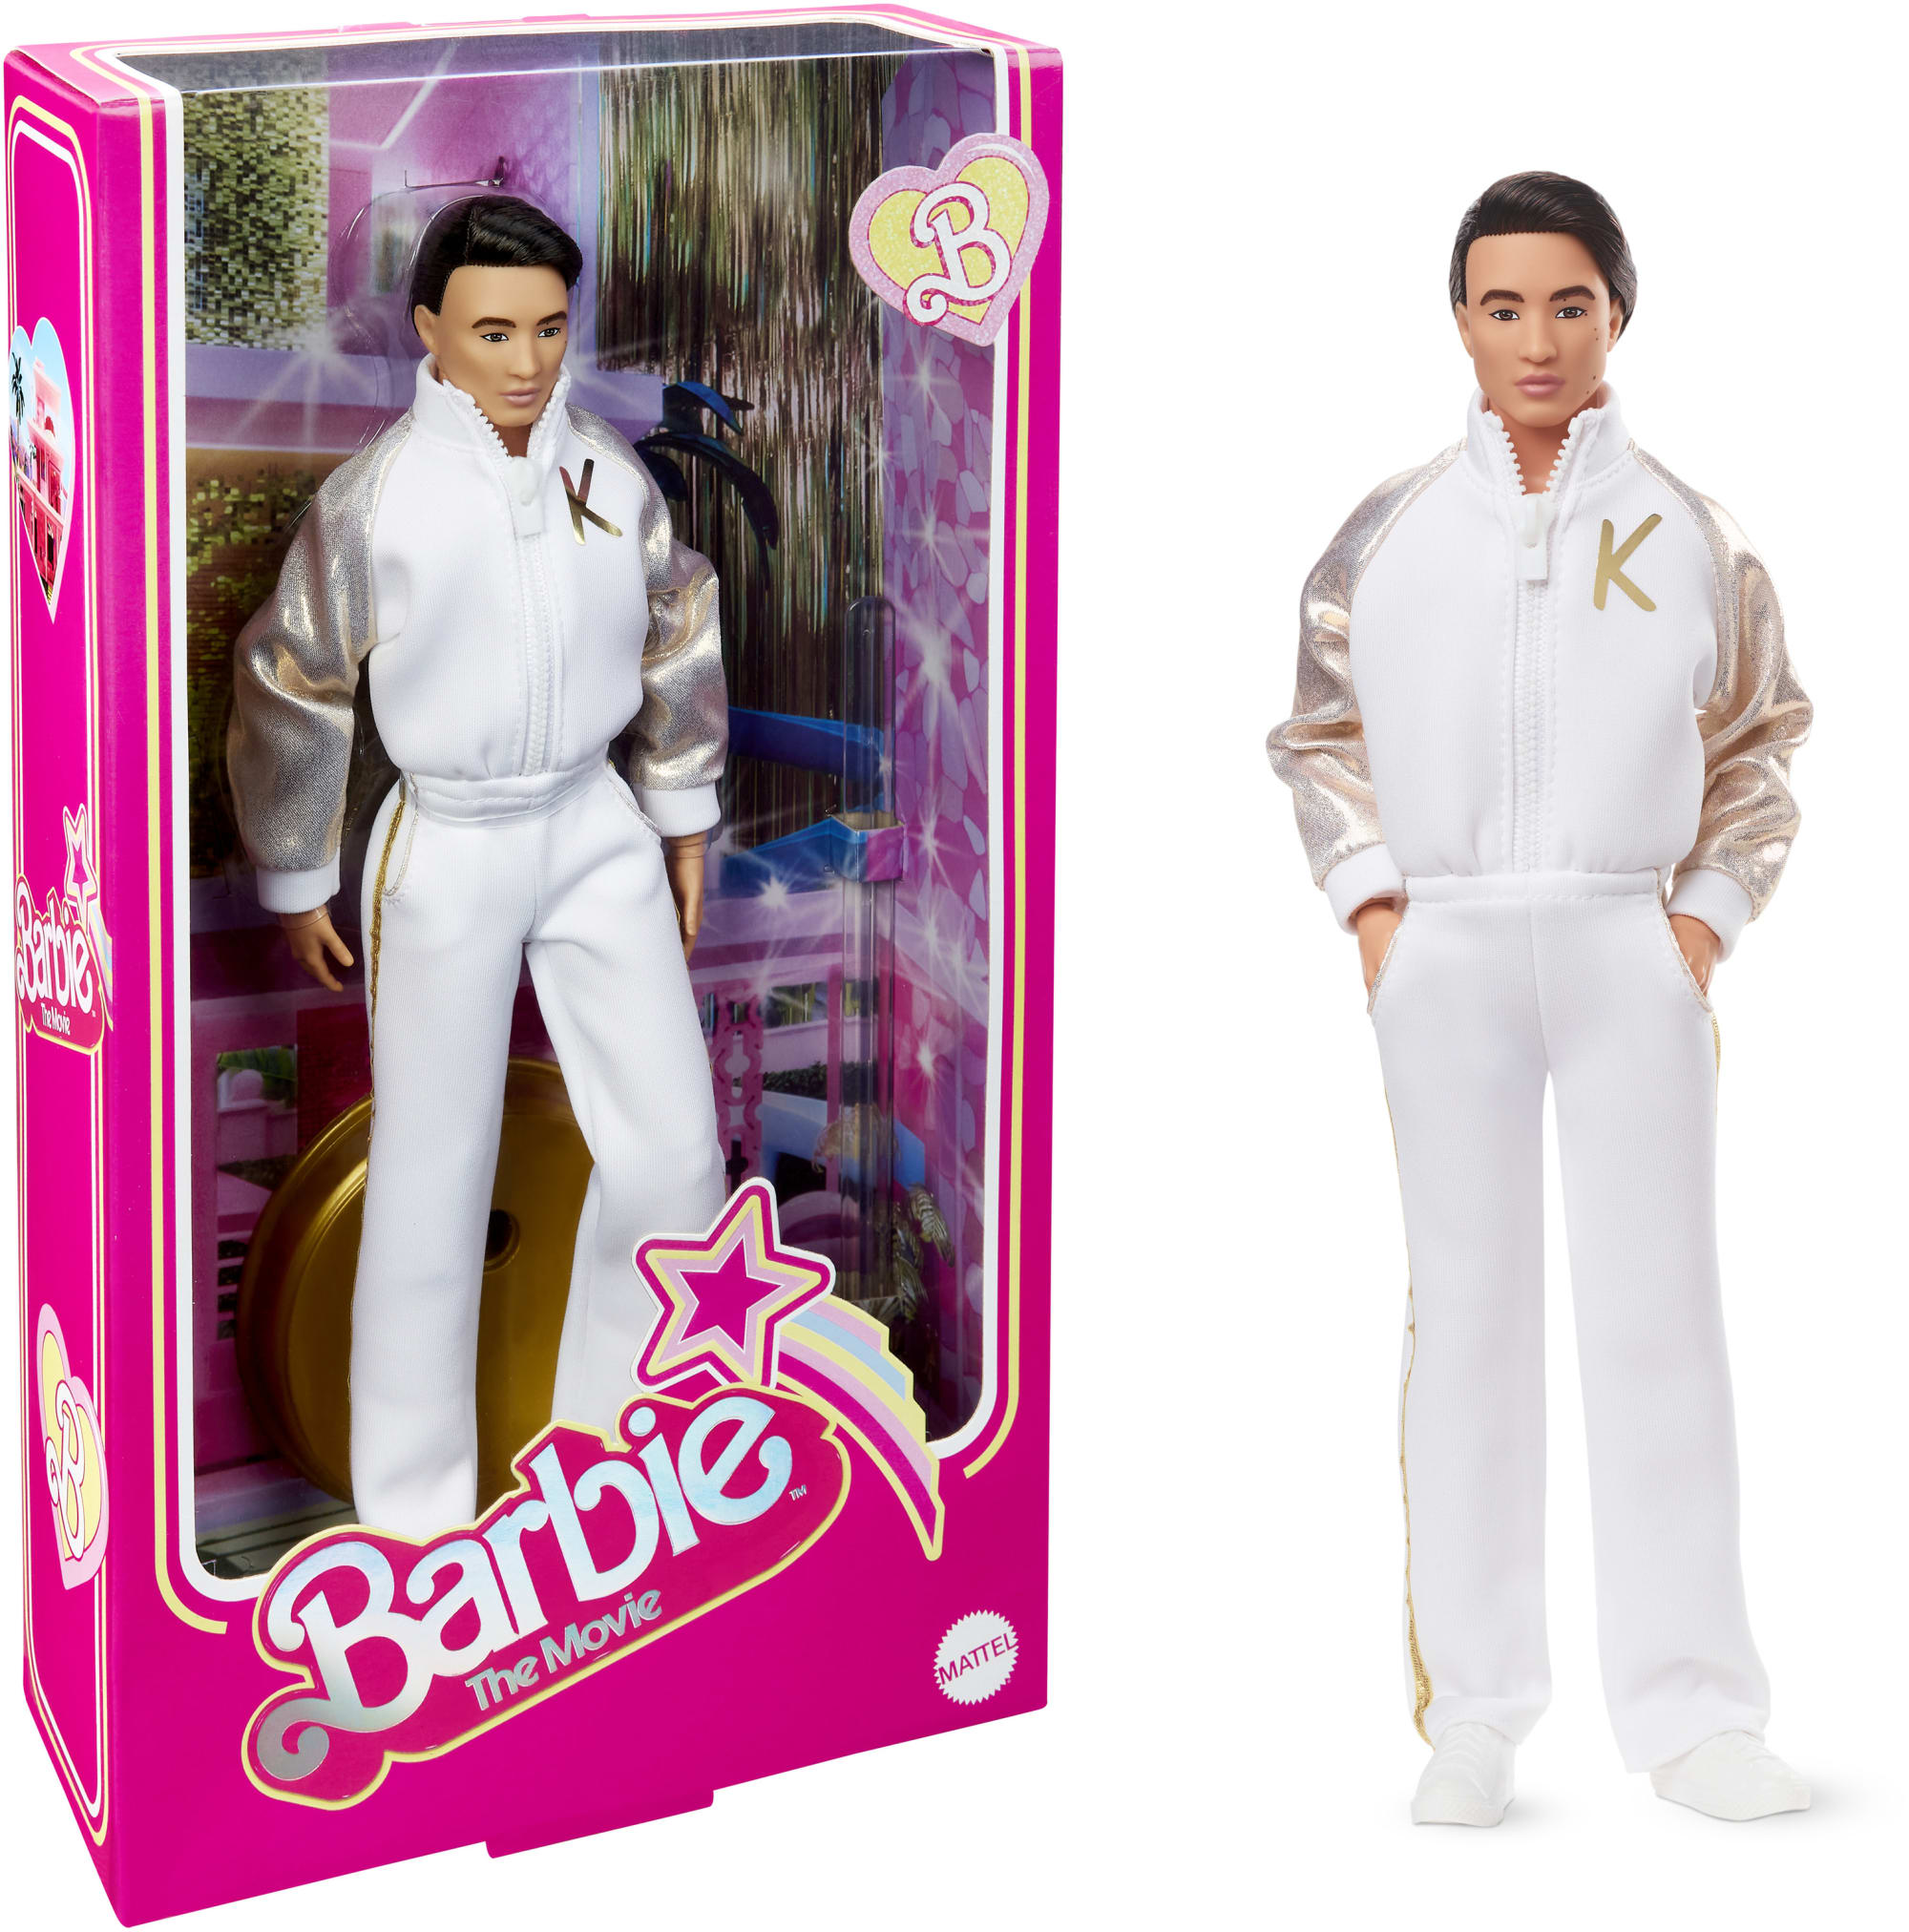 Collectible Barbie Movie Doll Ken in Tracksuit | MATTEL